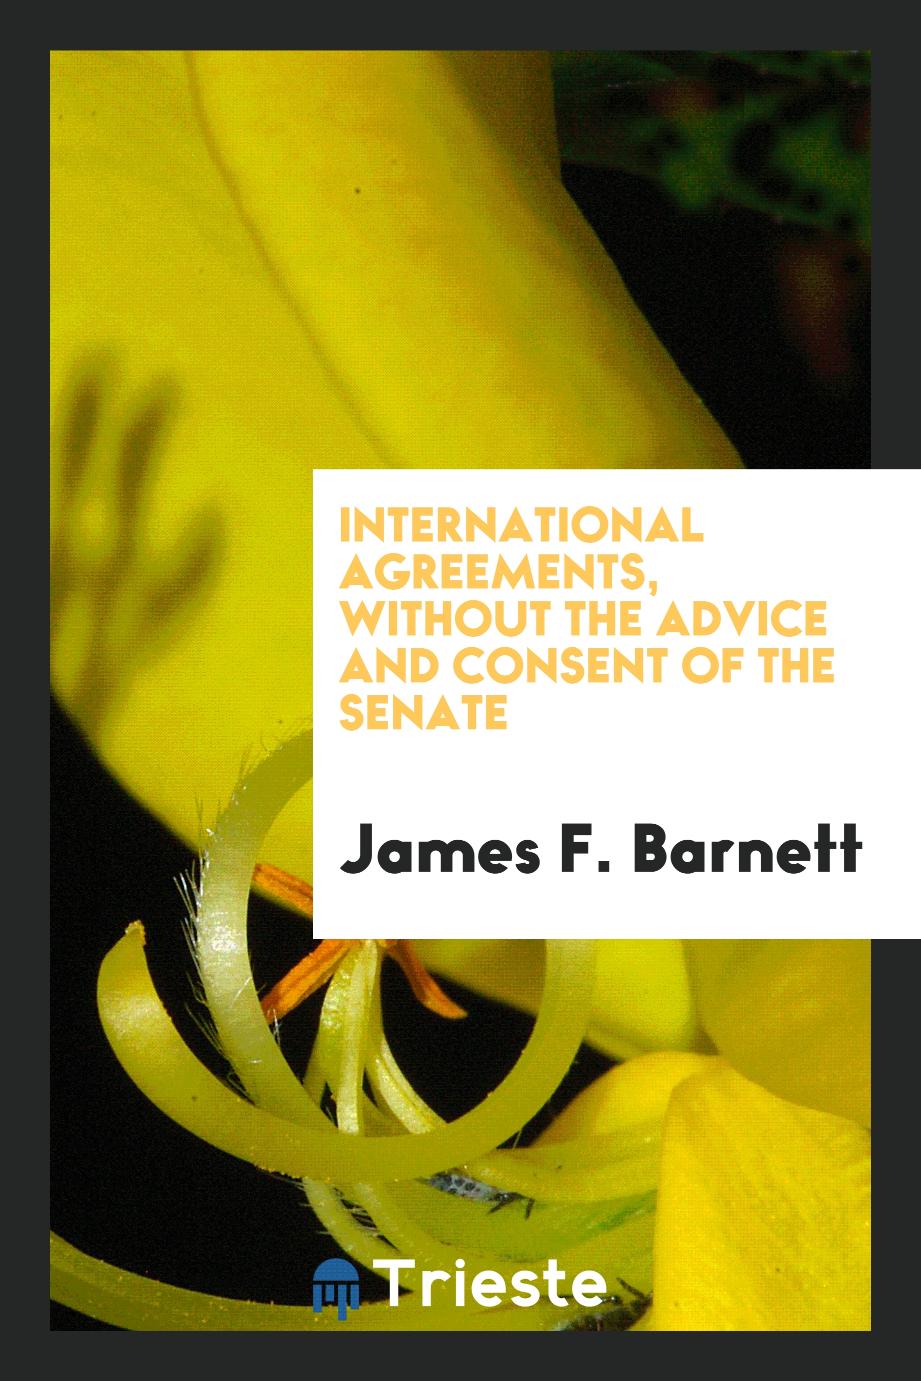 International Agreements, Without the Advice and Consent of the Senate